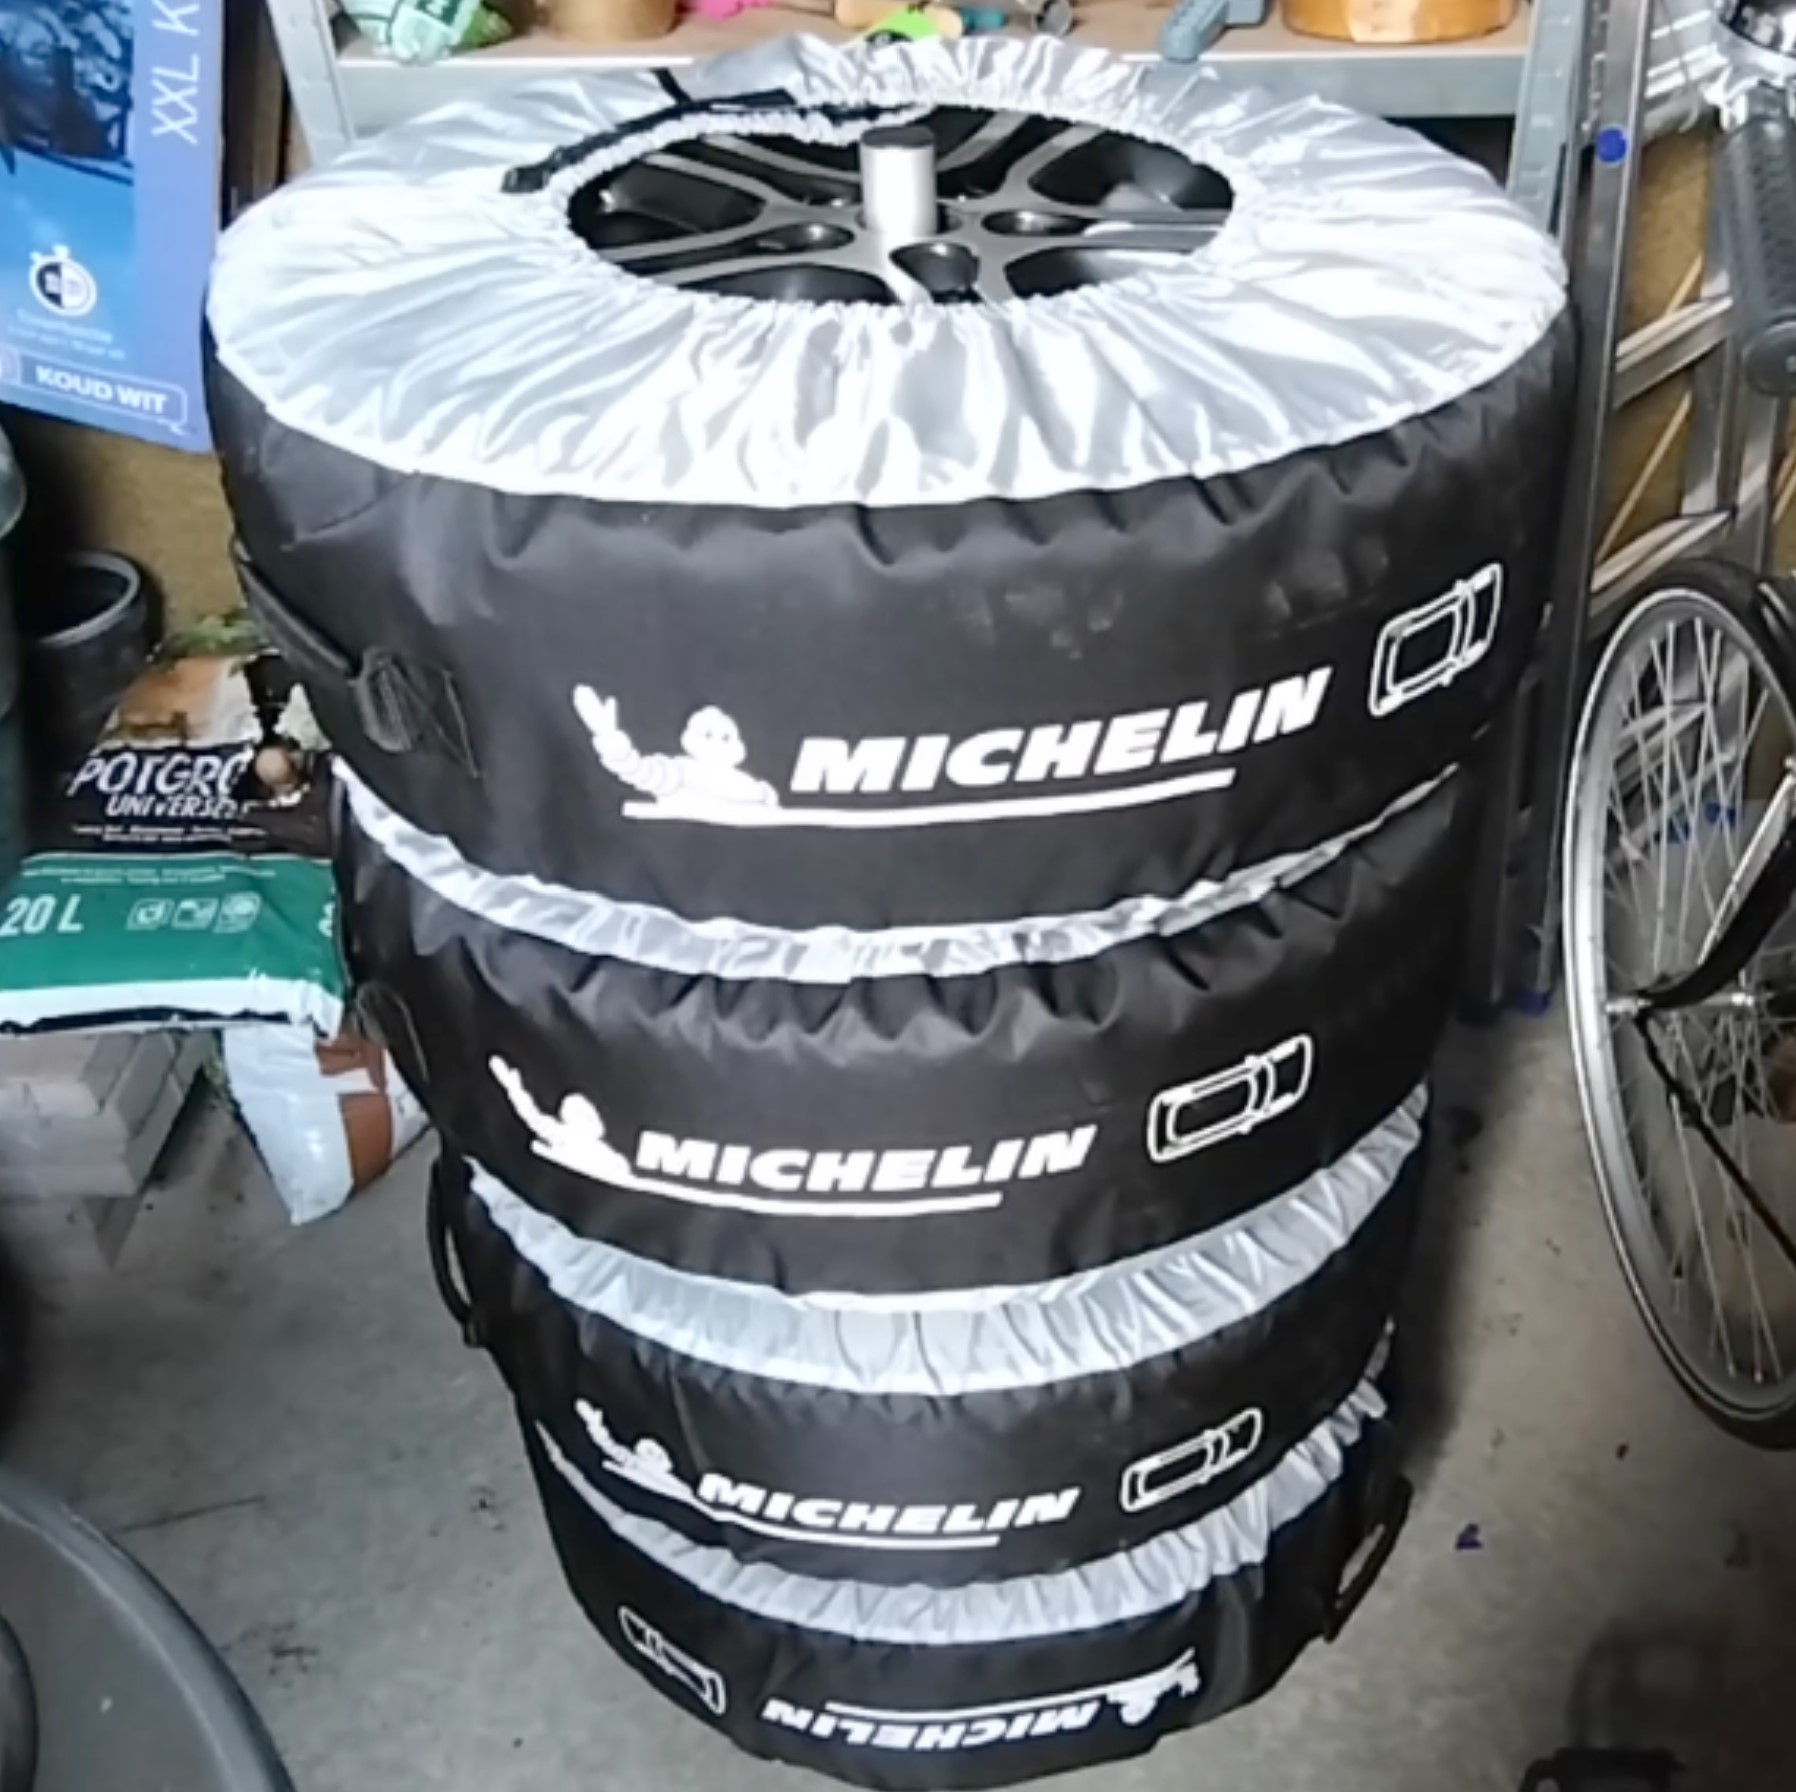 Michelin tire storage bags and Carpoint stand